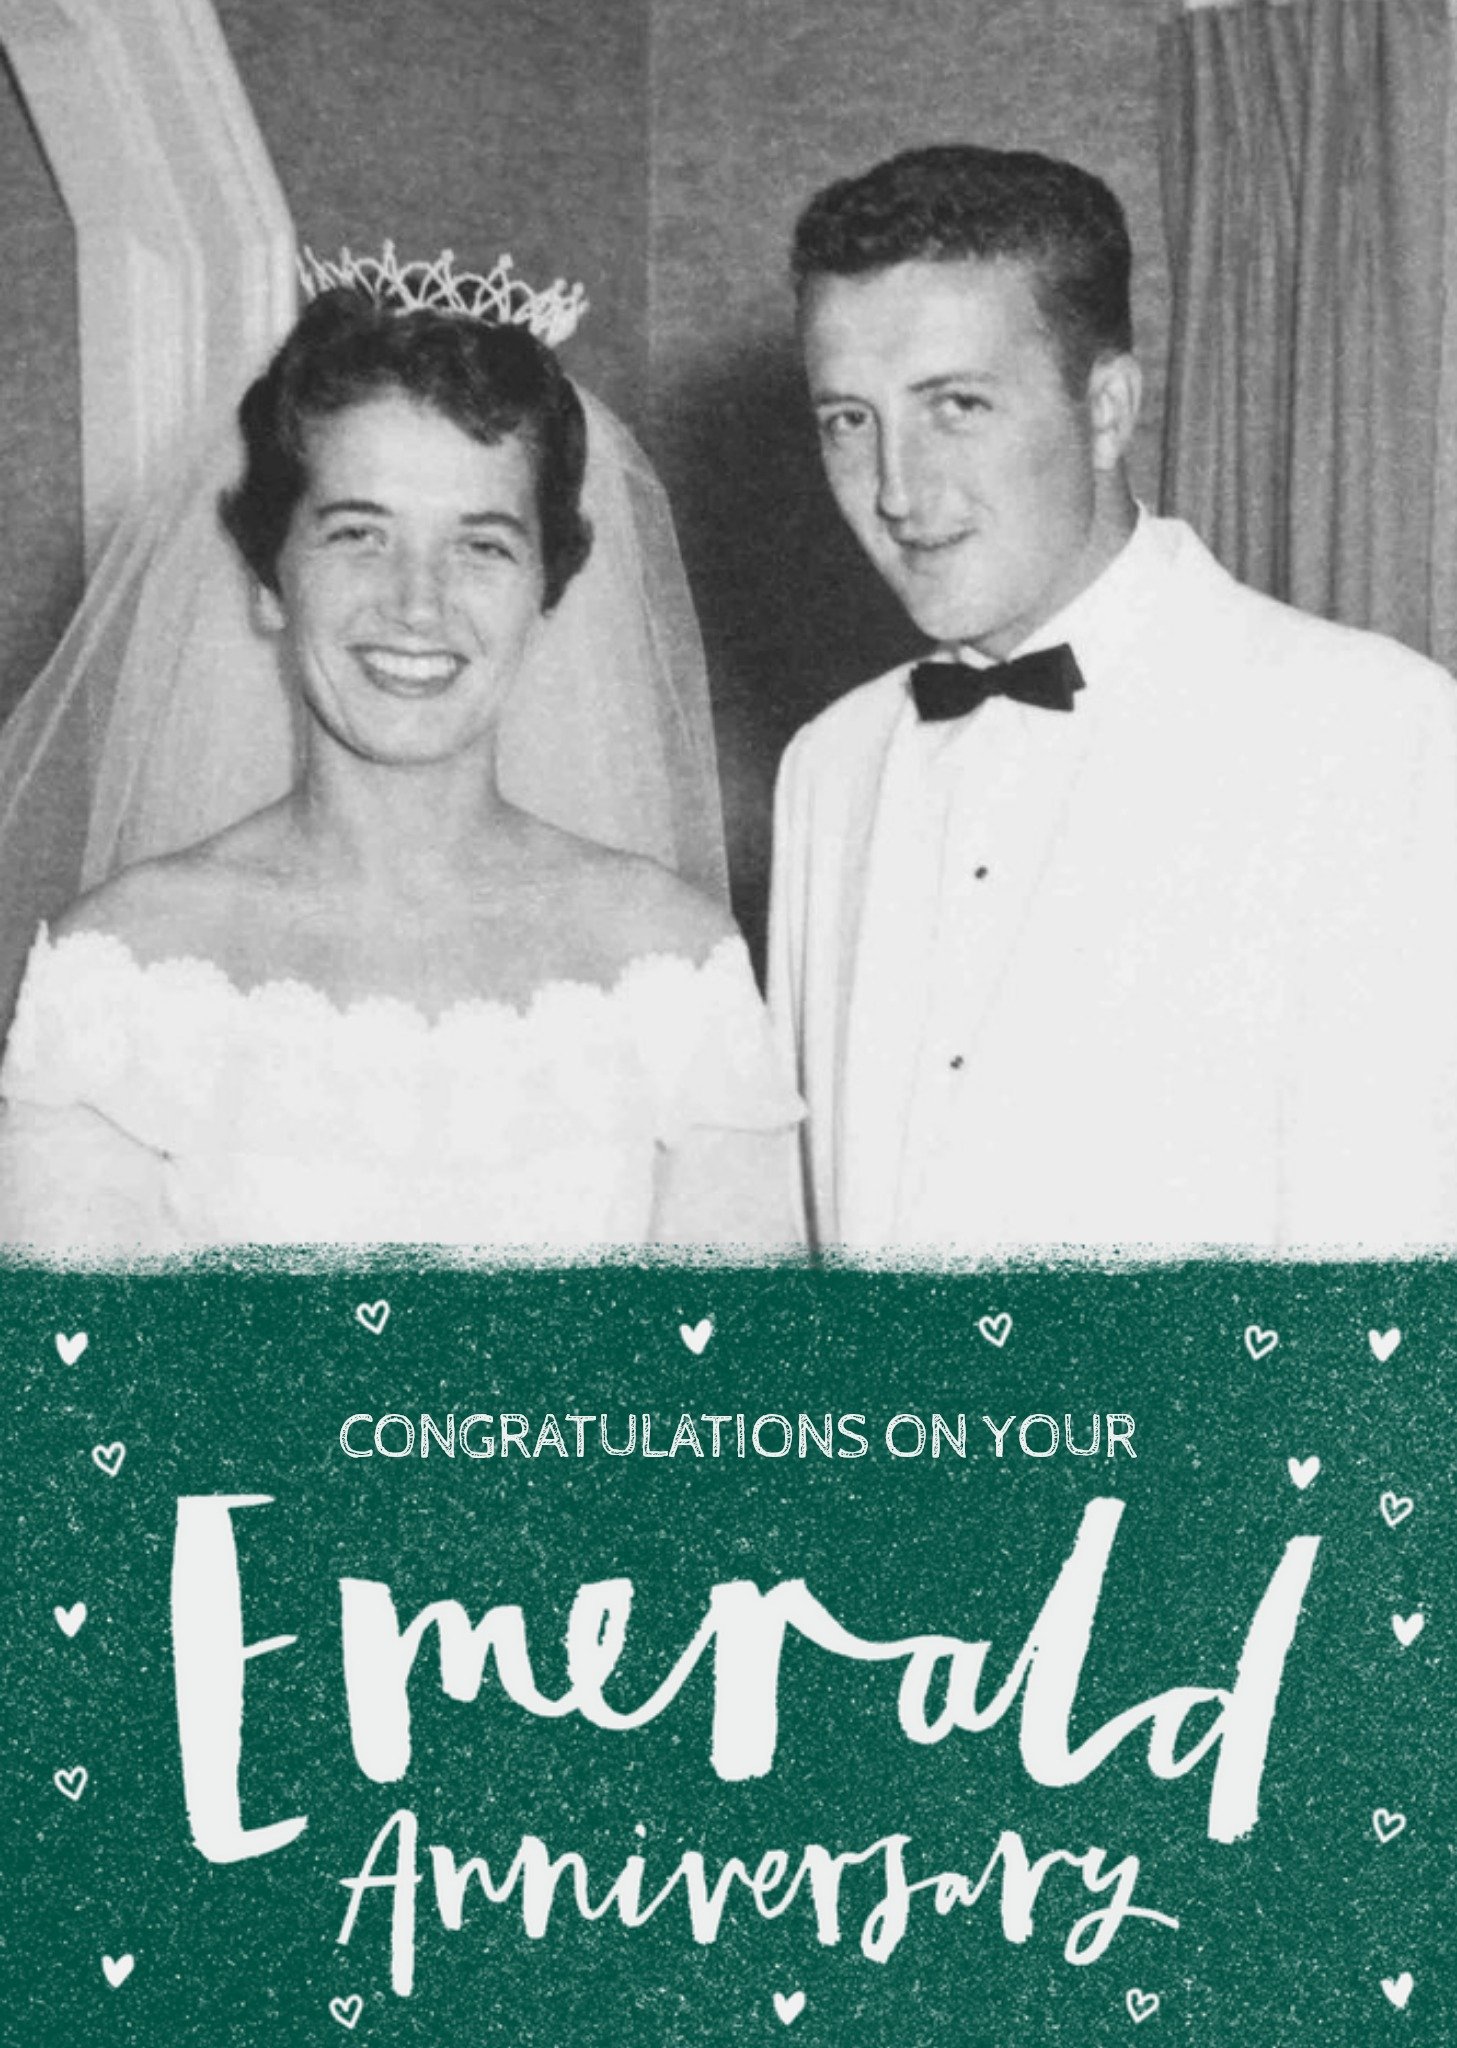 Moonpig Congratulations On Your Emerald Anniversary Photo Upload Card - 55th Anniversary, Large